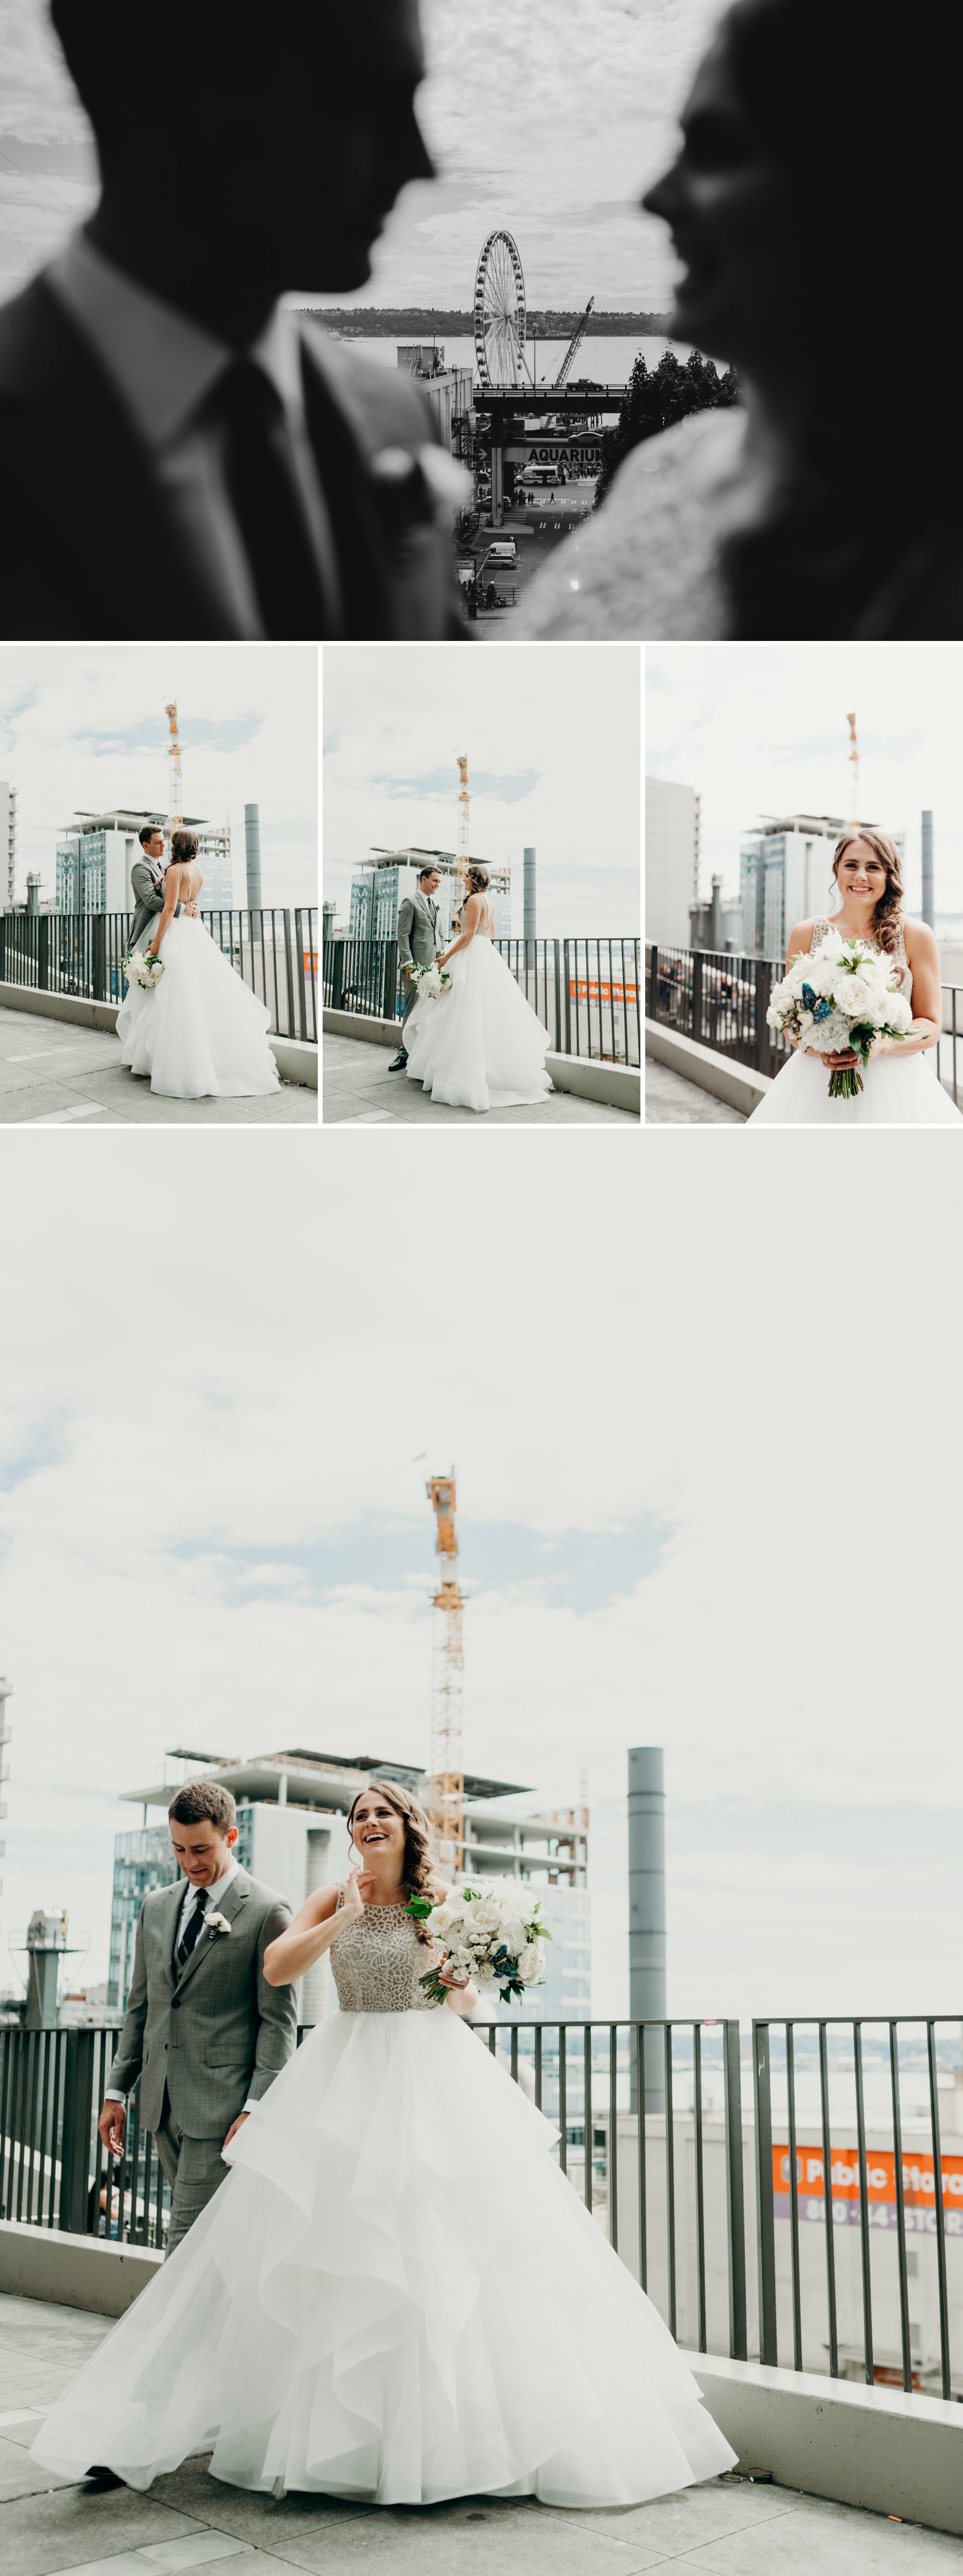 Seattle is such a romantic place for a wedding! By Sodo Park wedding photographer Briana Morrison.